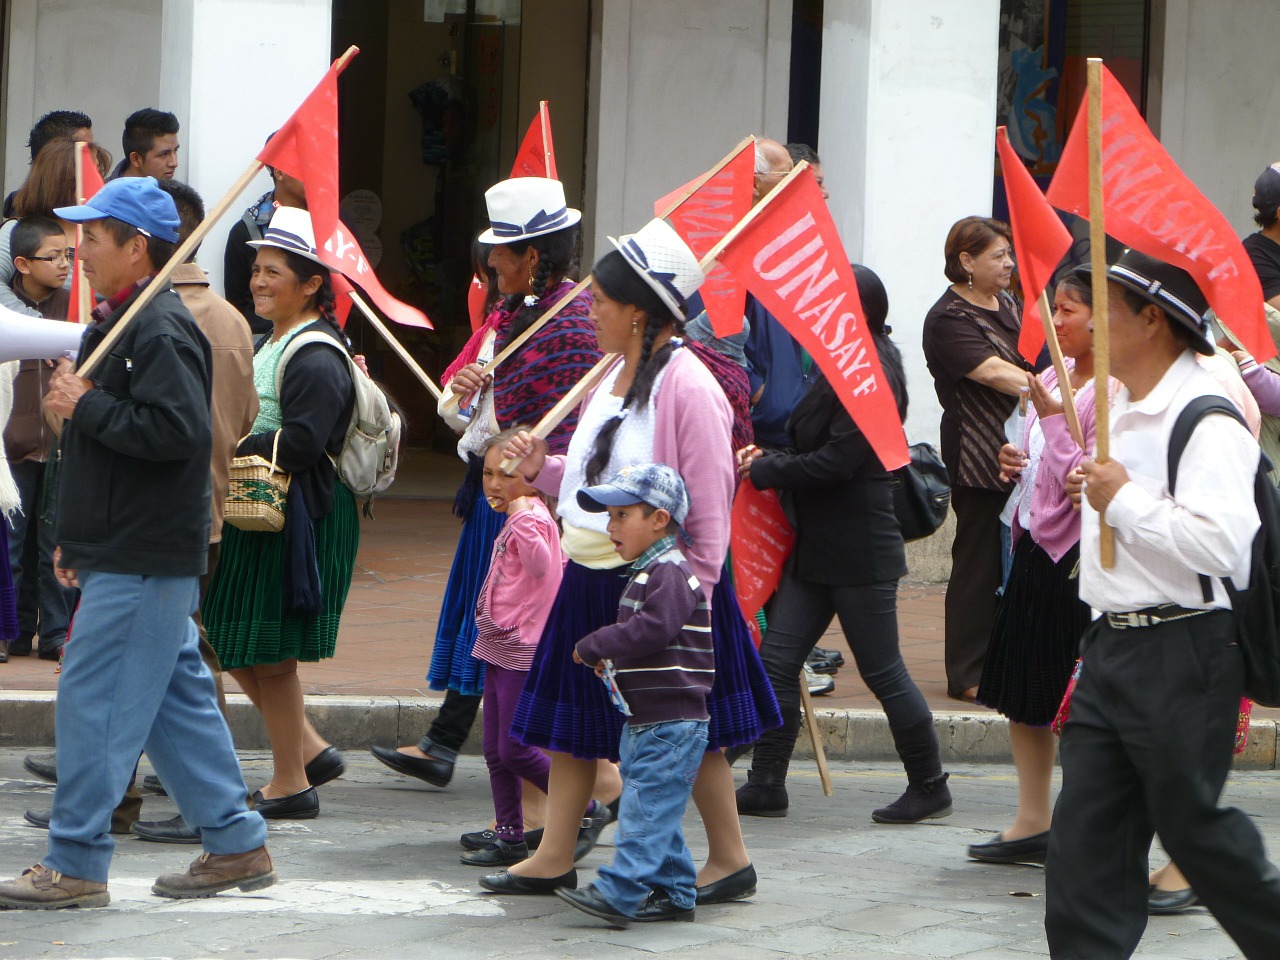 Ecuador indigenous people continue to protest in capital to demand reforms